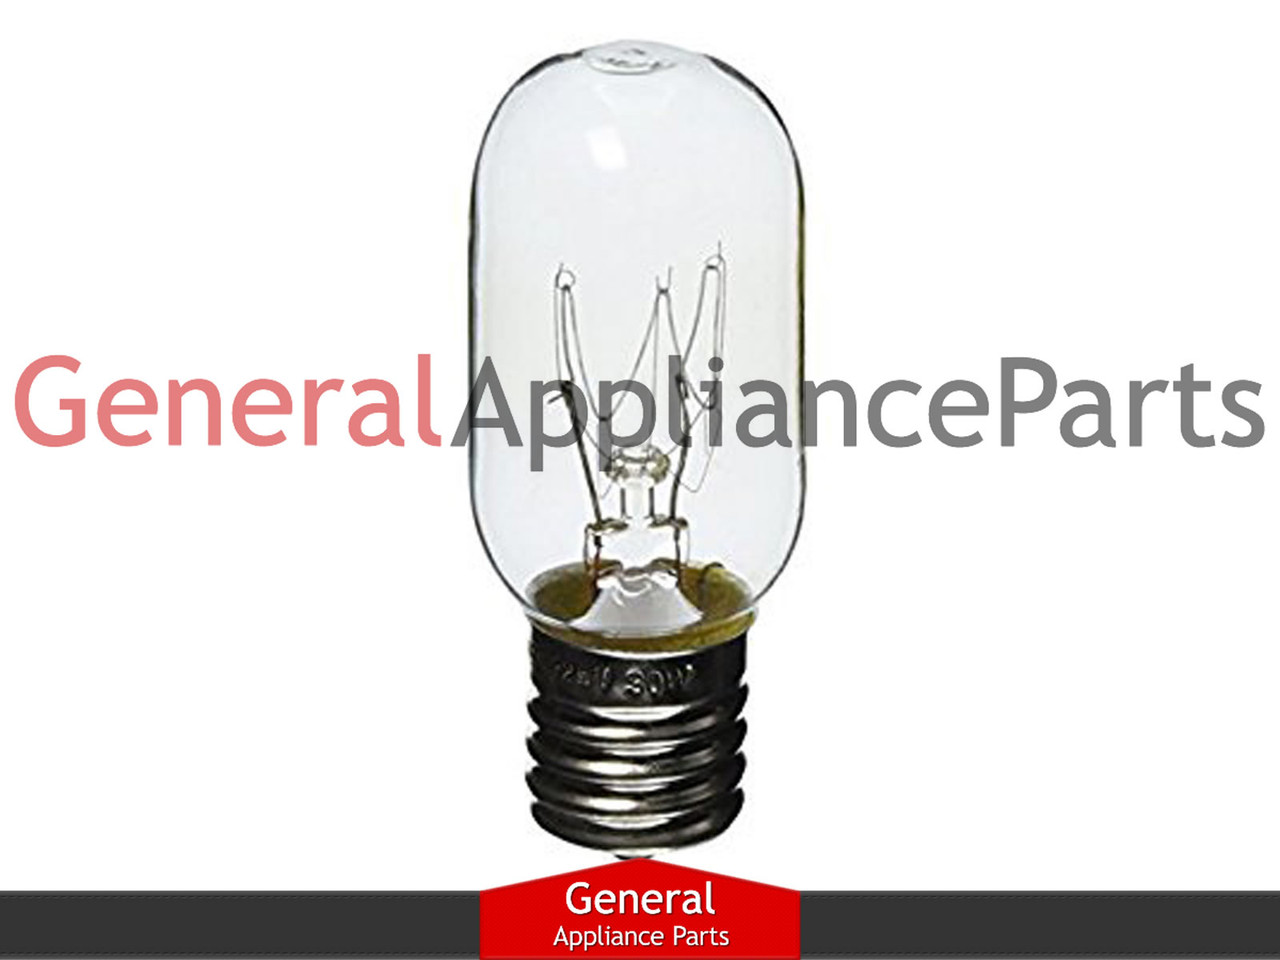 ClimaTek Microwave Light Bulb replaces GE General Electric # WB36X10160 -  General Appliance Parts